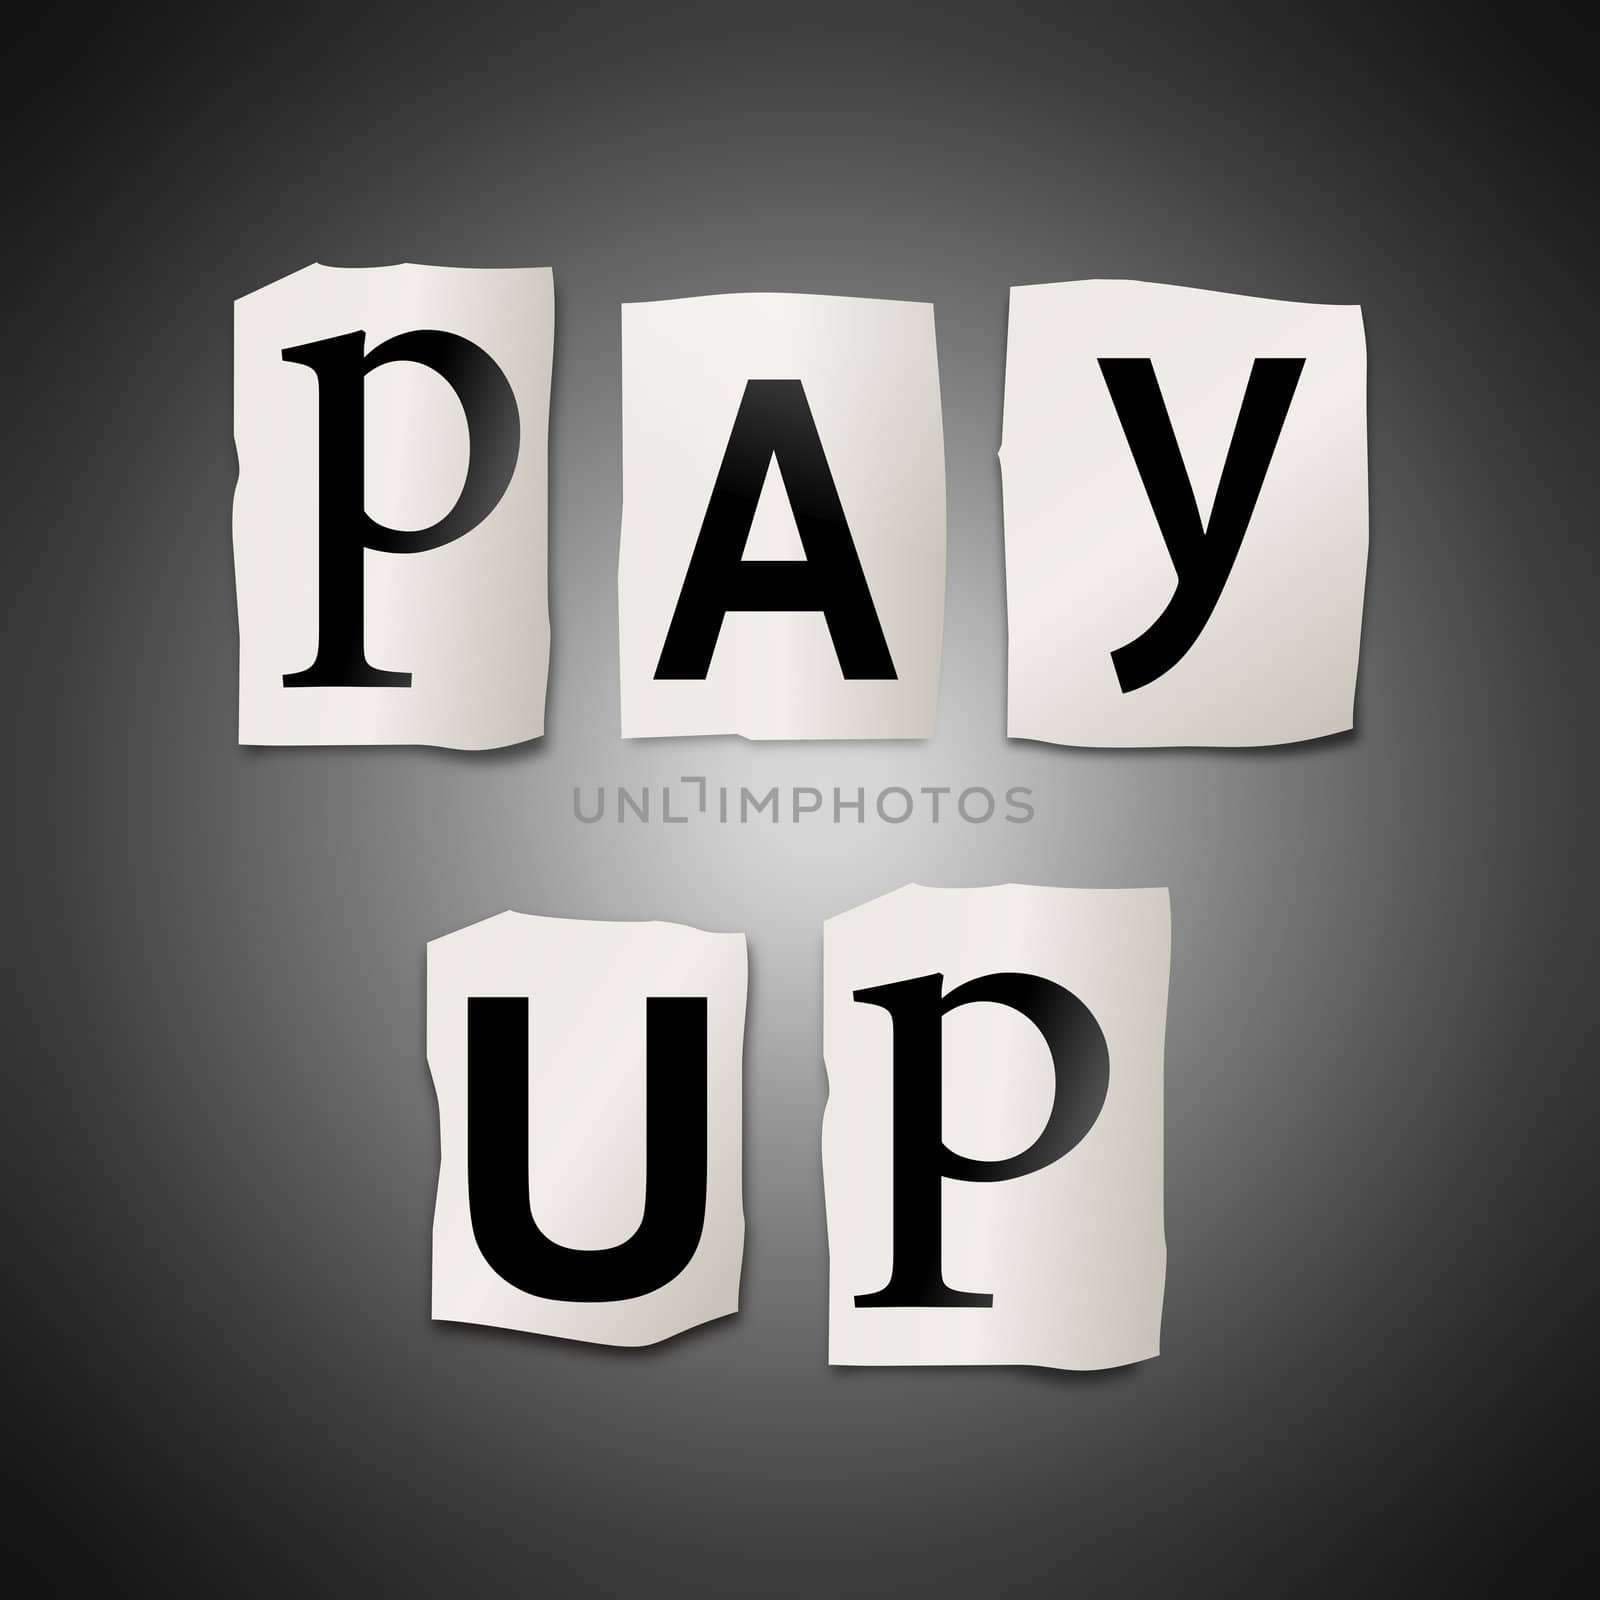 Illustration depicting cutout printed letters arranged to form the words pay up.